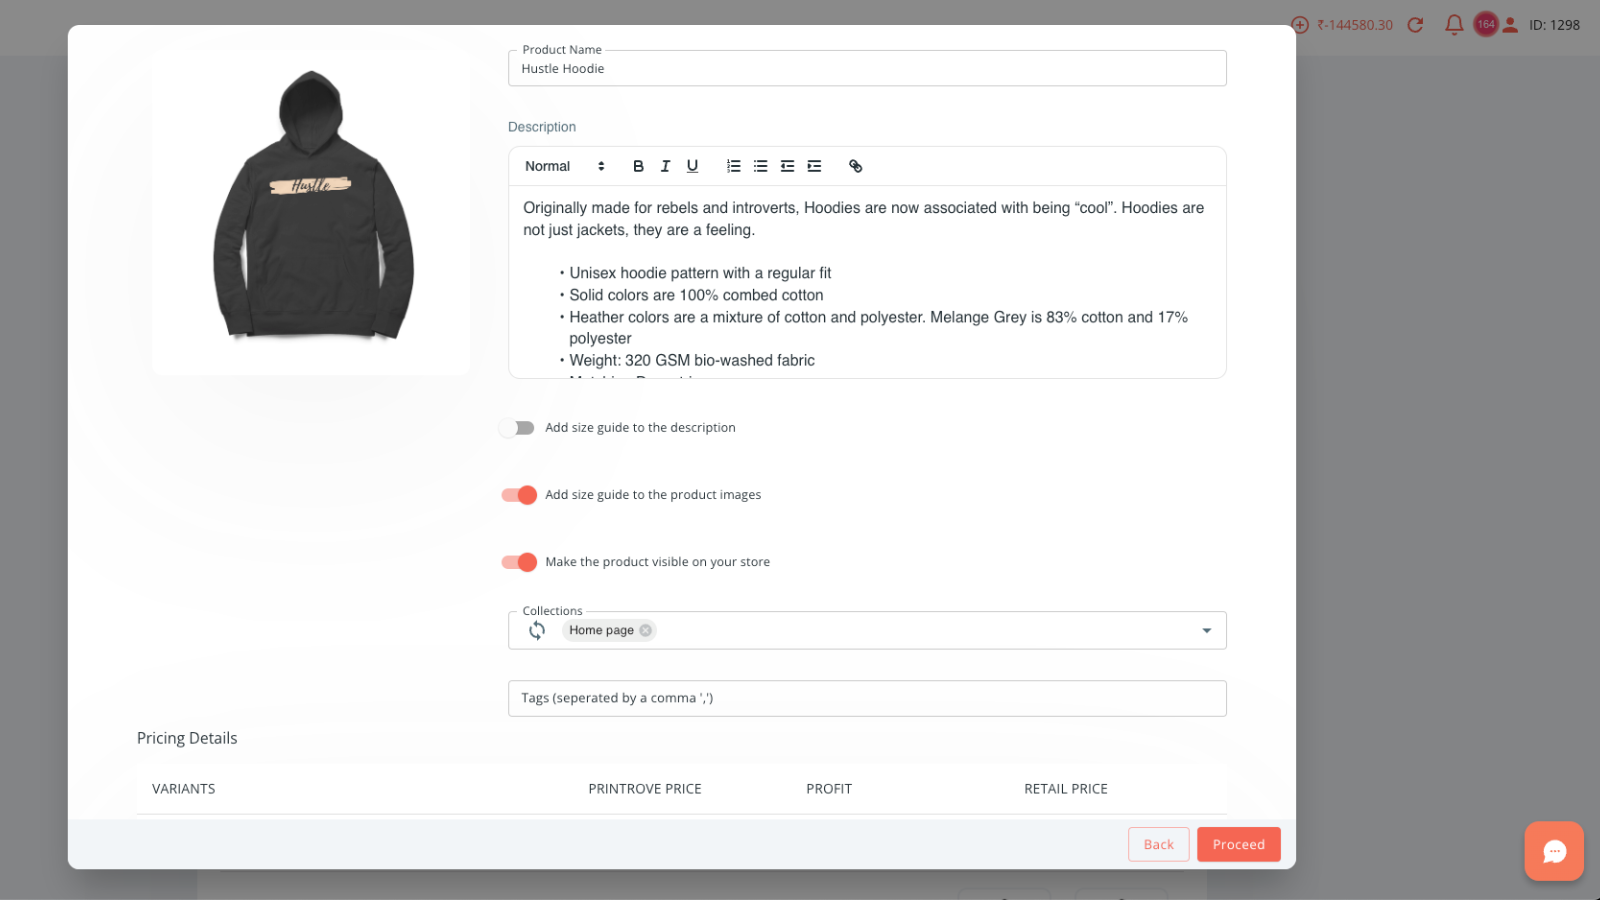 Push products to your store in a few clicks